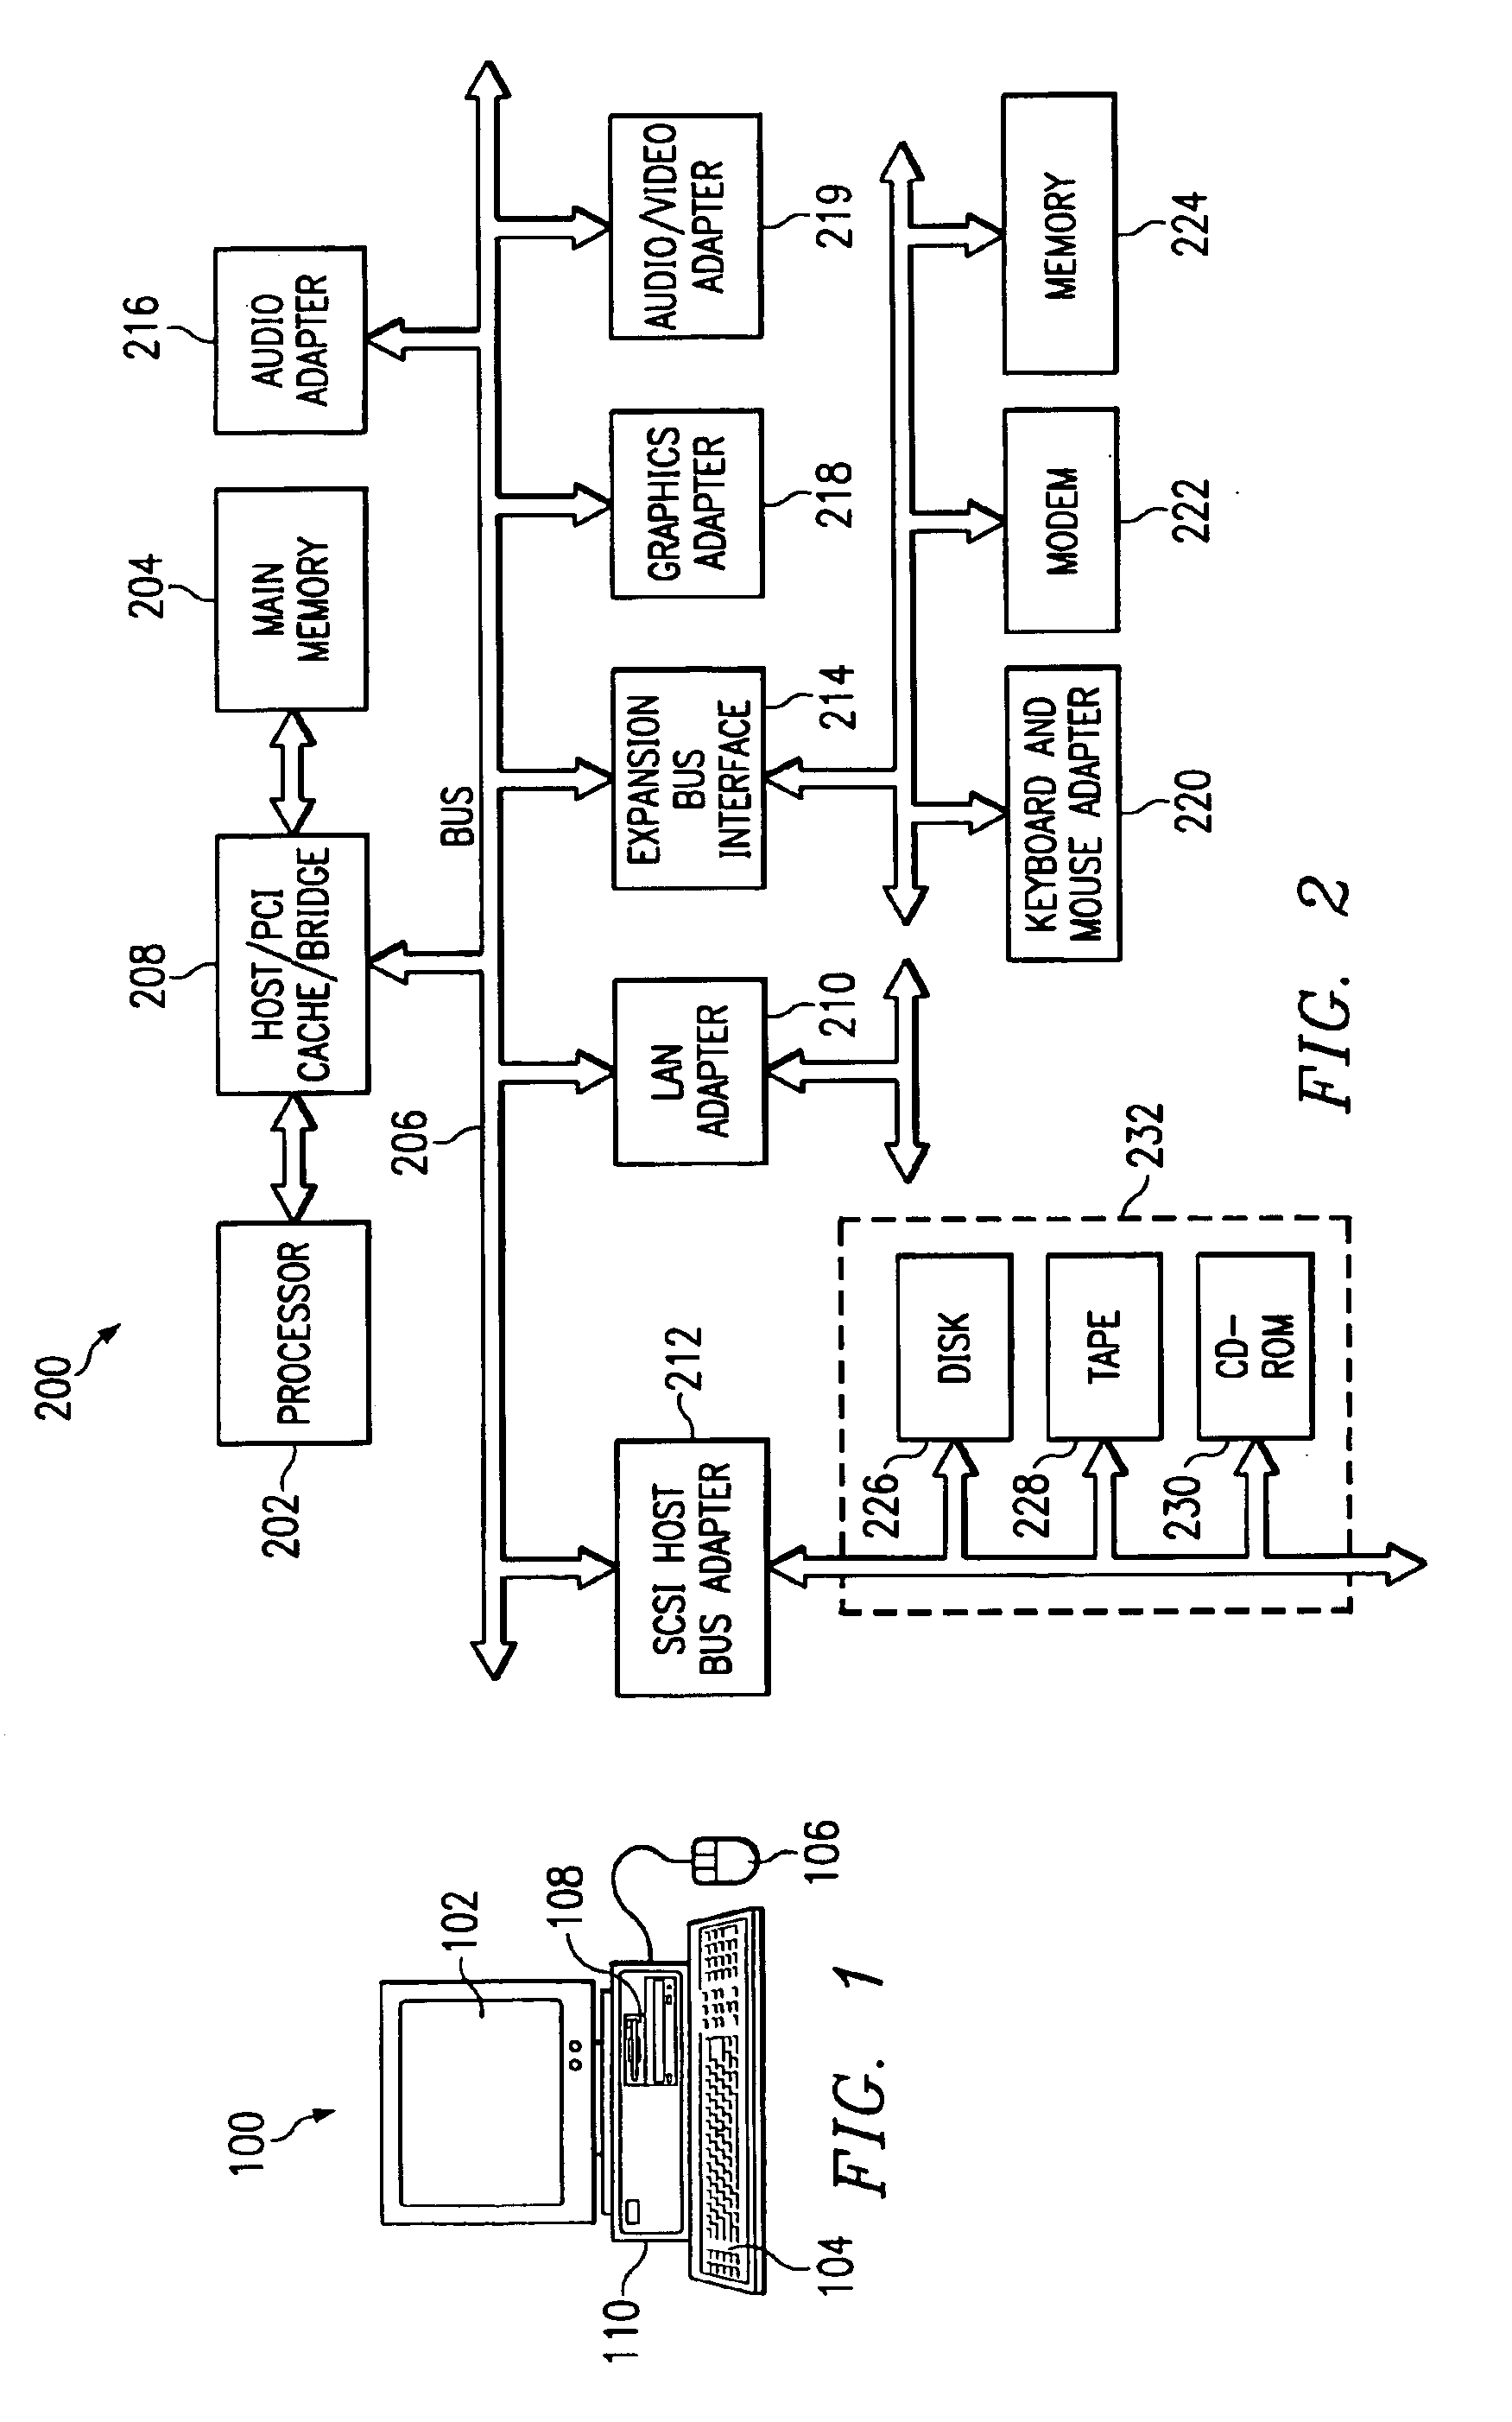 Copy/move graphical user interface apparatus and method